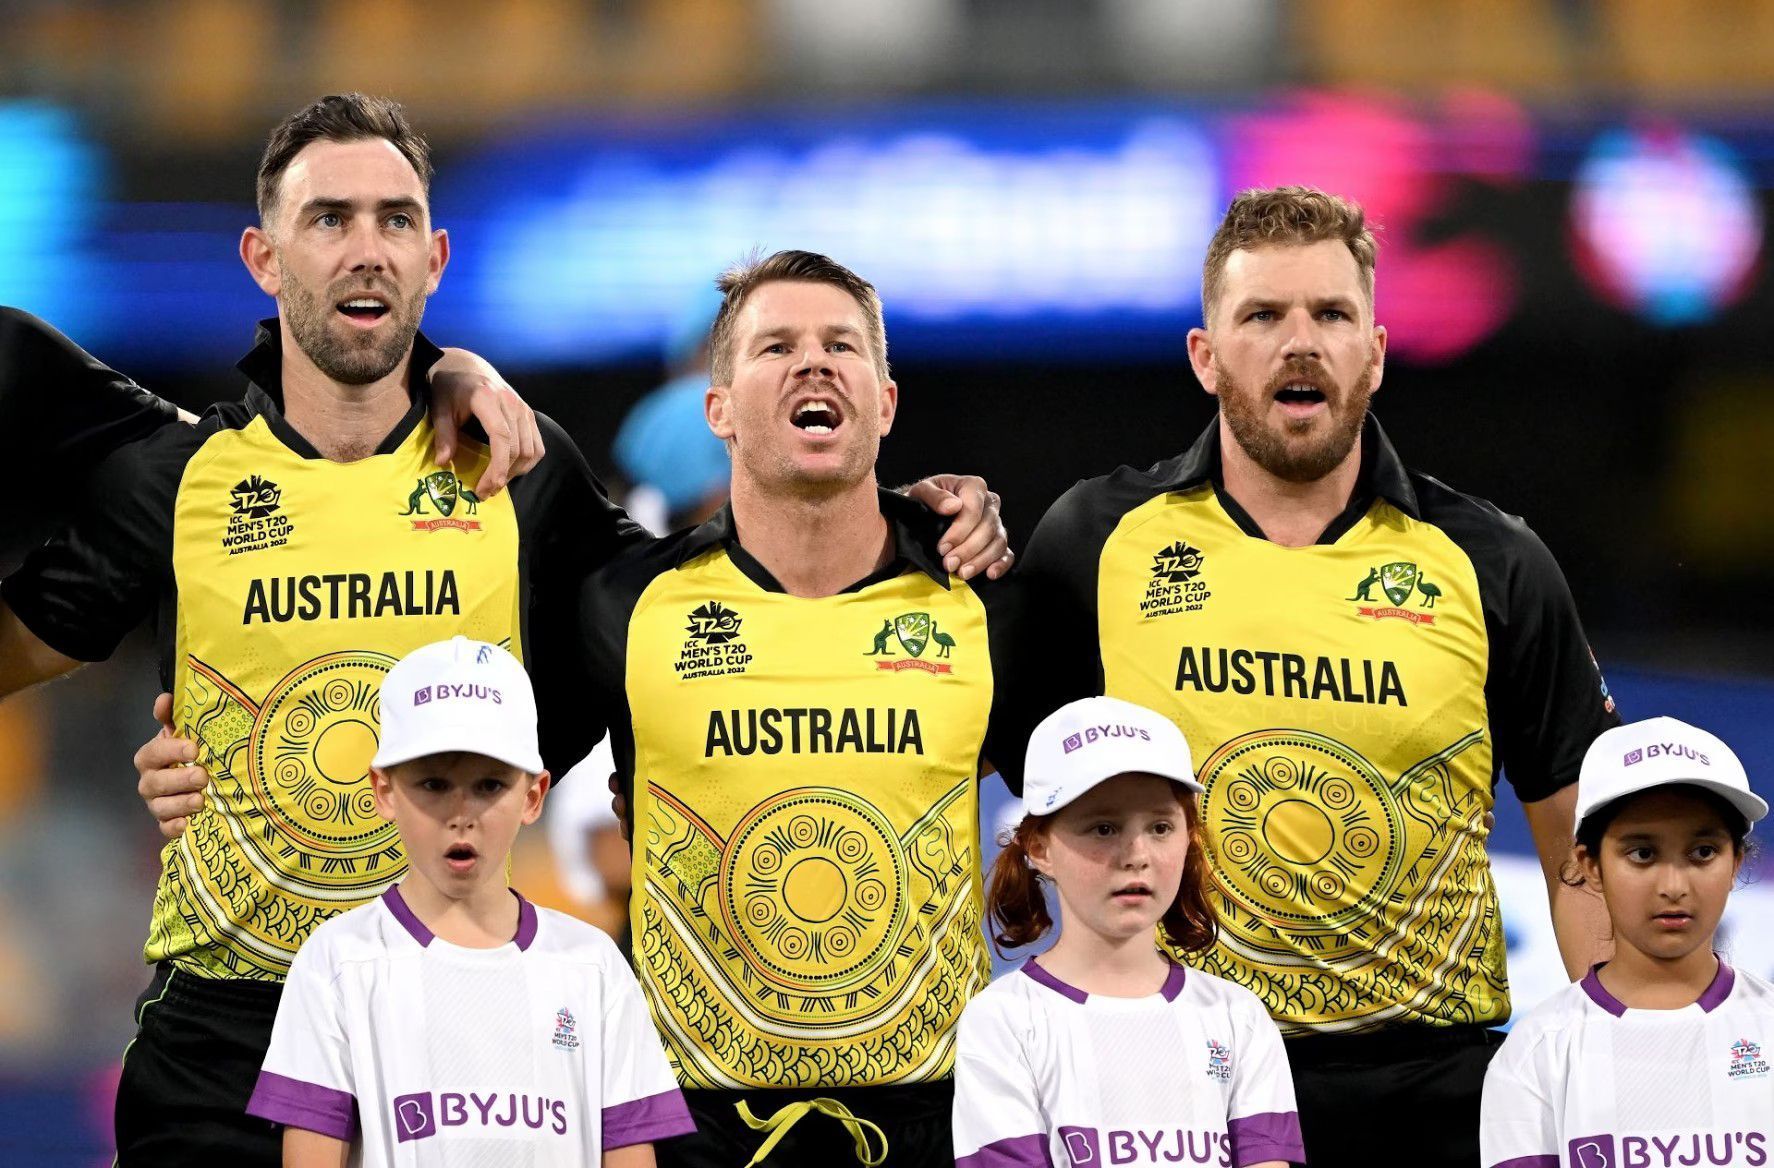 Australia could not seal a semi-final spot at the T20 World Cup 2022 after a few disappointing displays. [Pic Credit: Getty Images]